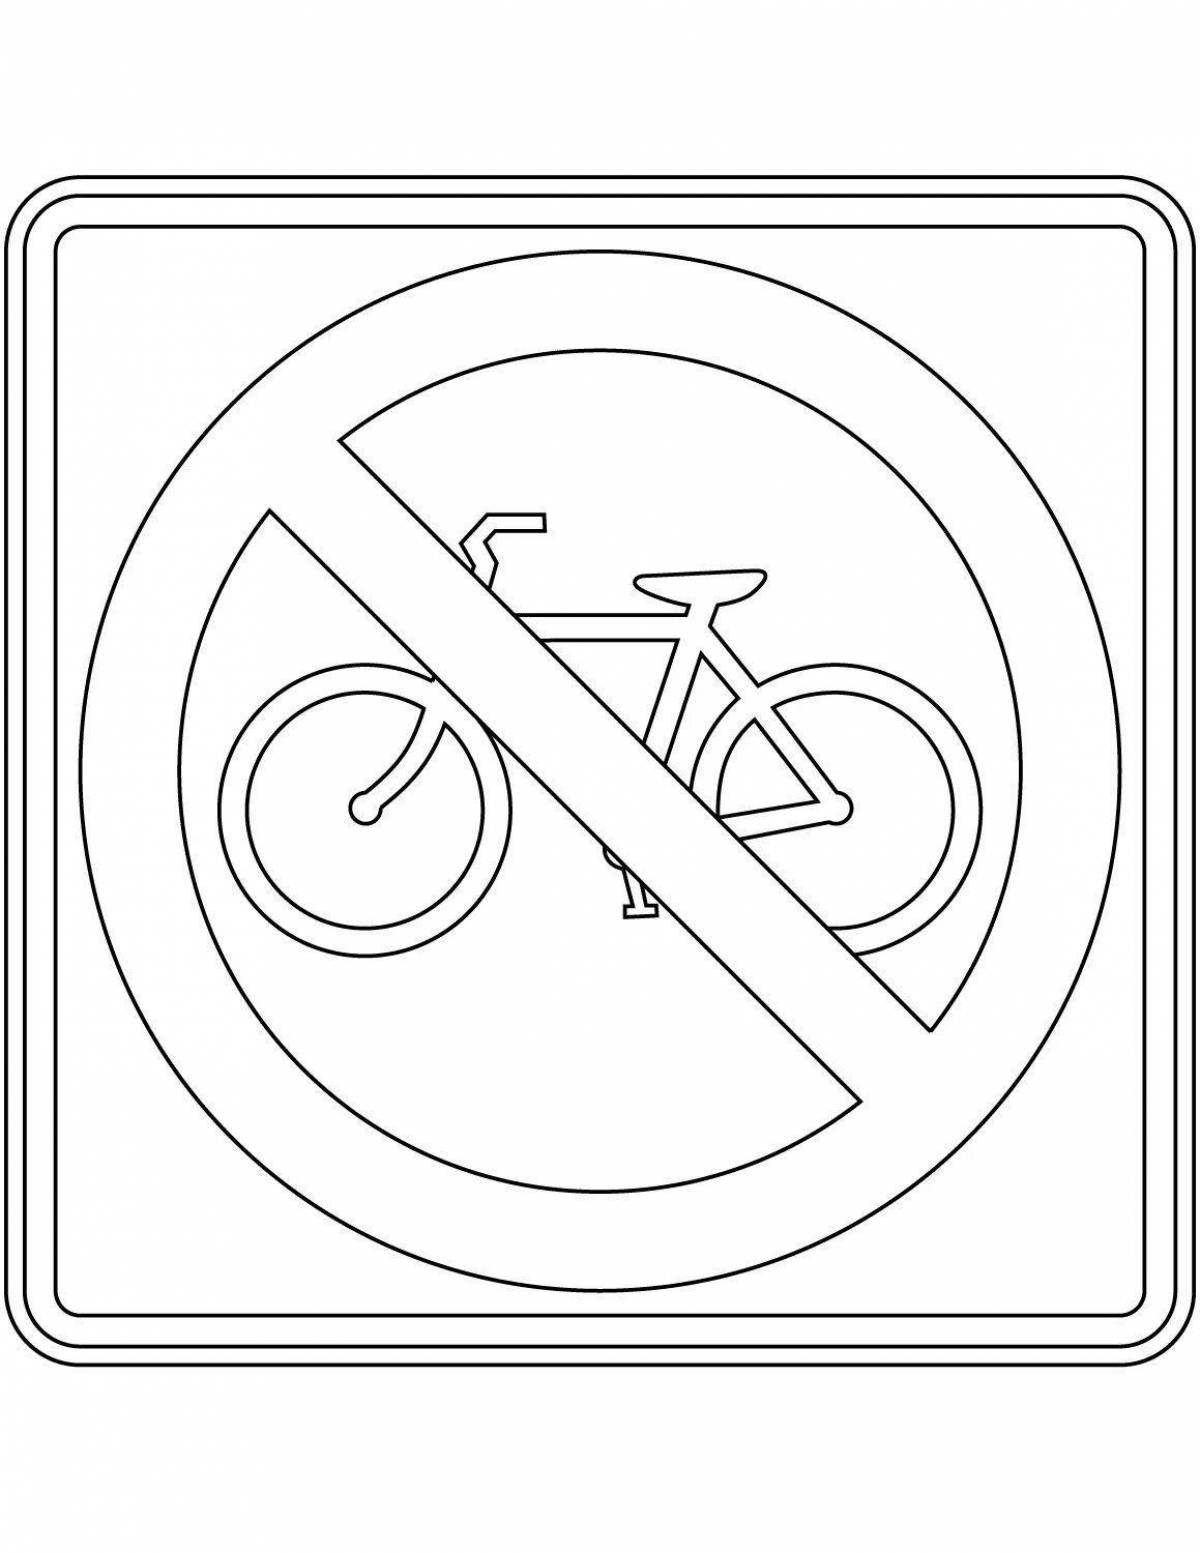 Coloring page fascinating parking sign